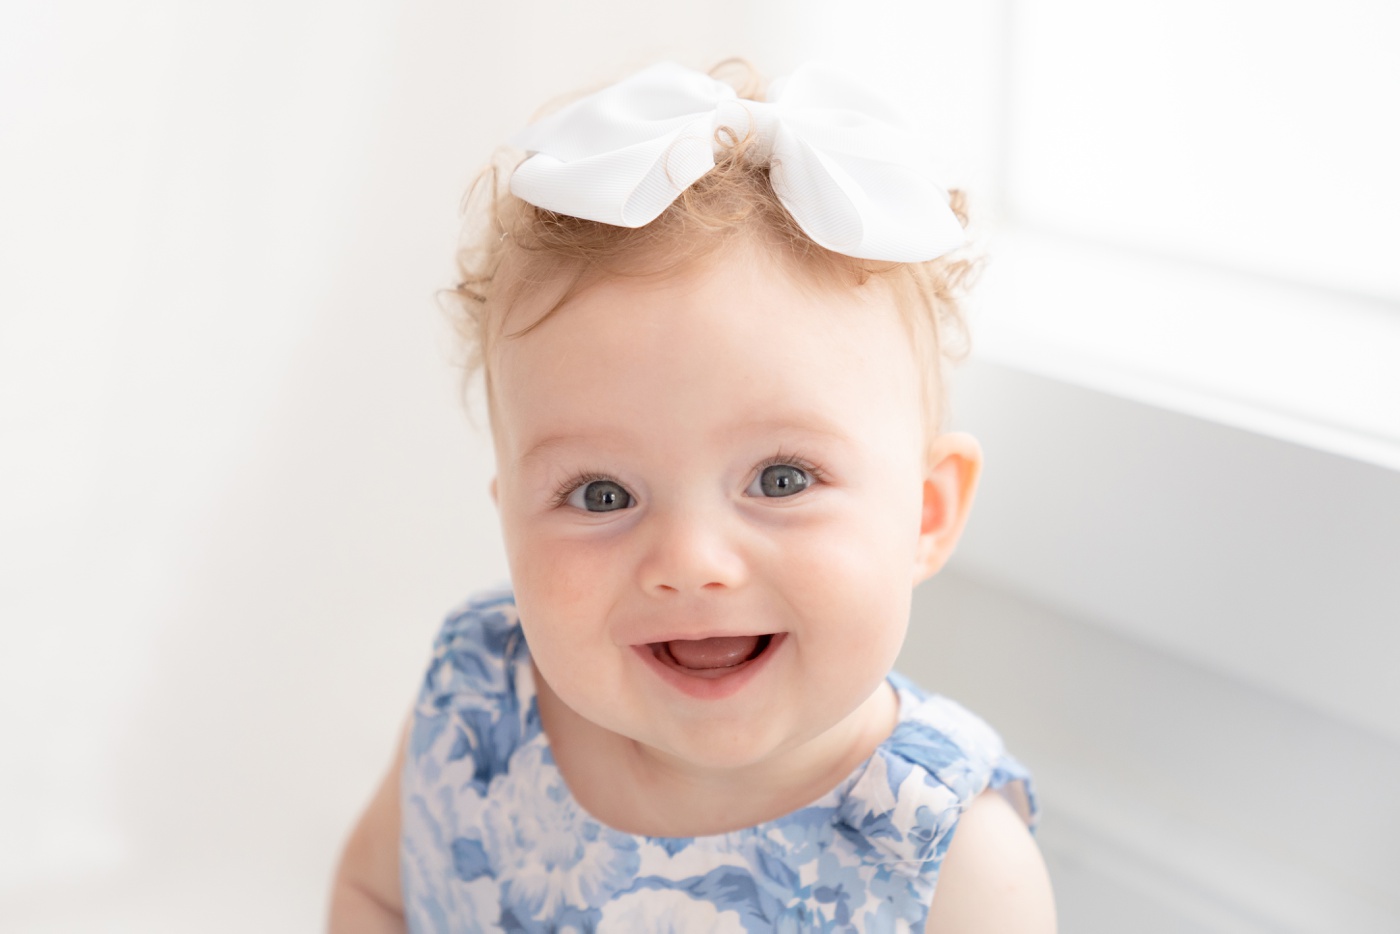 Baby girl sitting the floor of a white photography studio wearing a white and blue floral dress